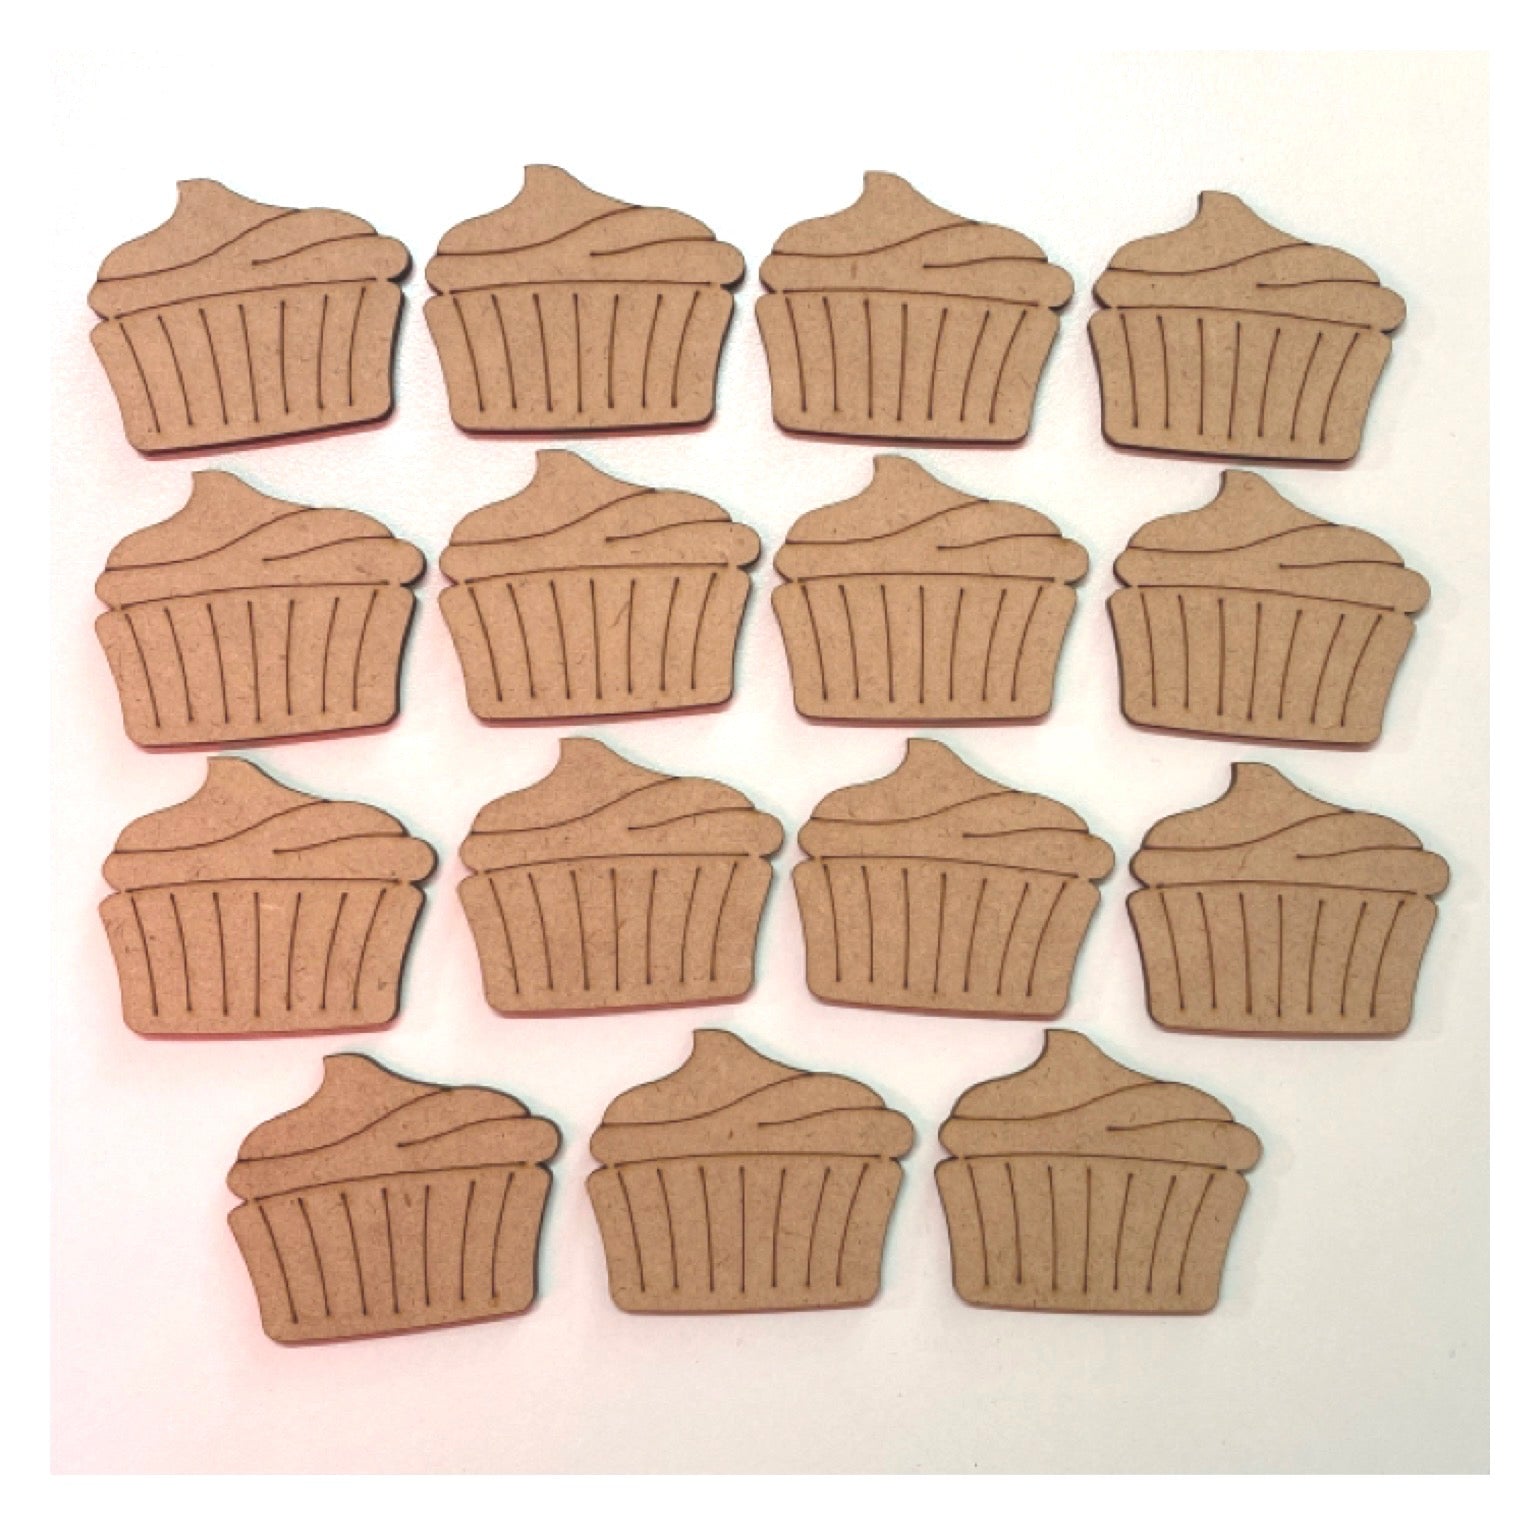 Cup Cakes set of 15 MDF Shape DIY Raw Cut Out Art Craft Décor - The Renmy Store Homewares & Gifts 